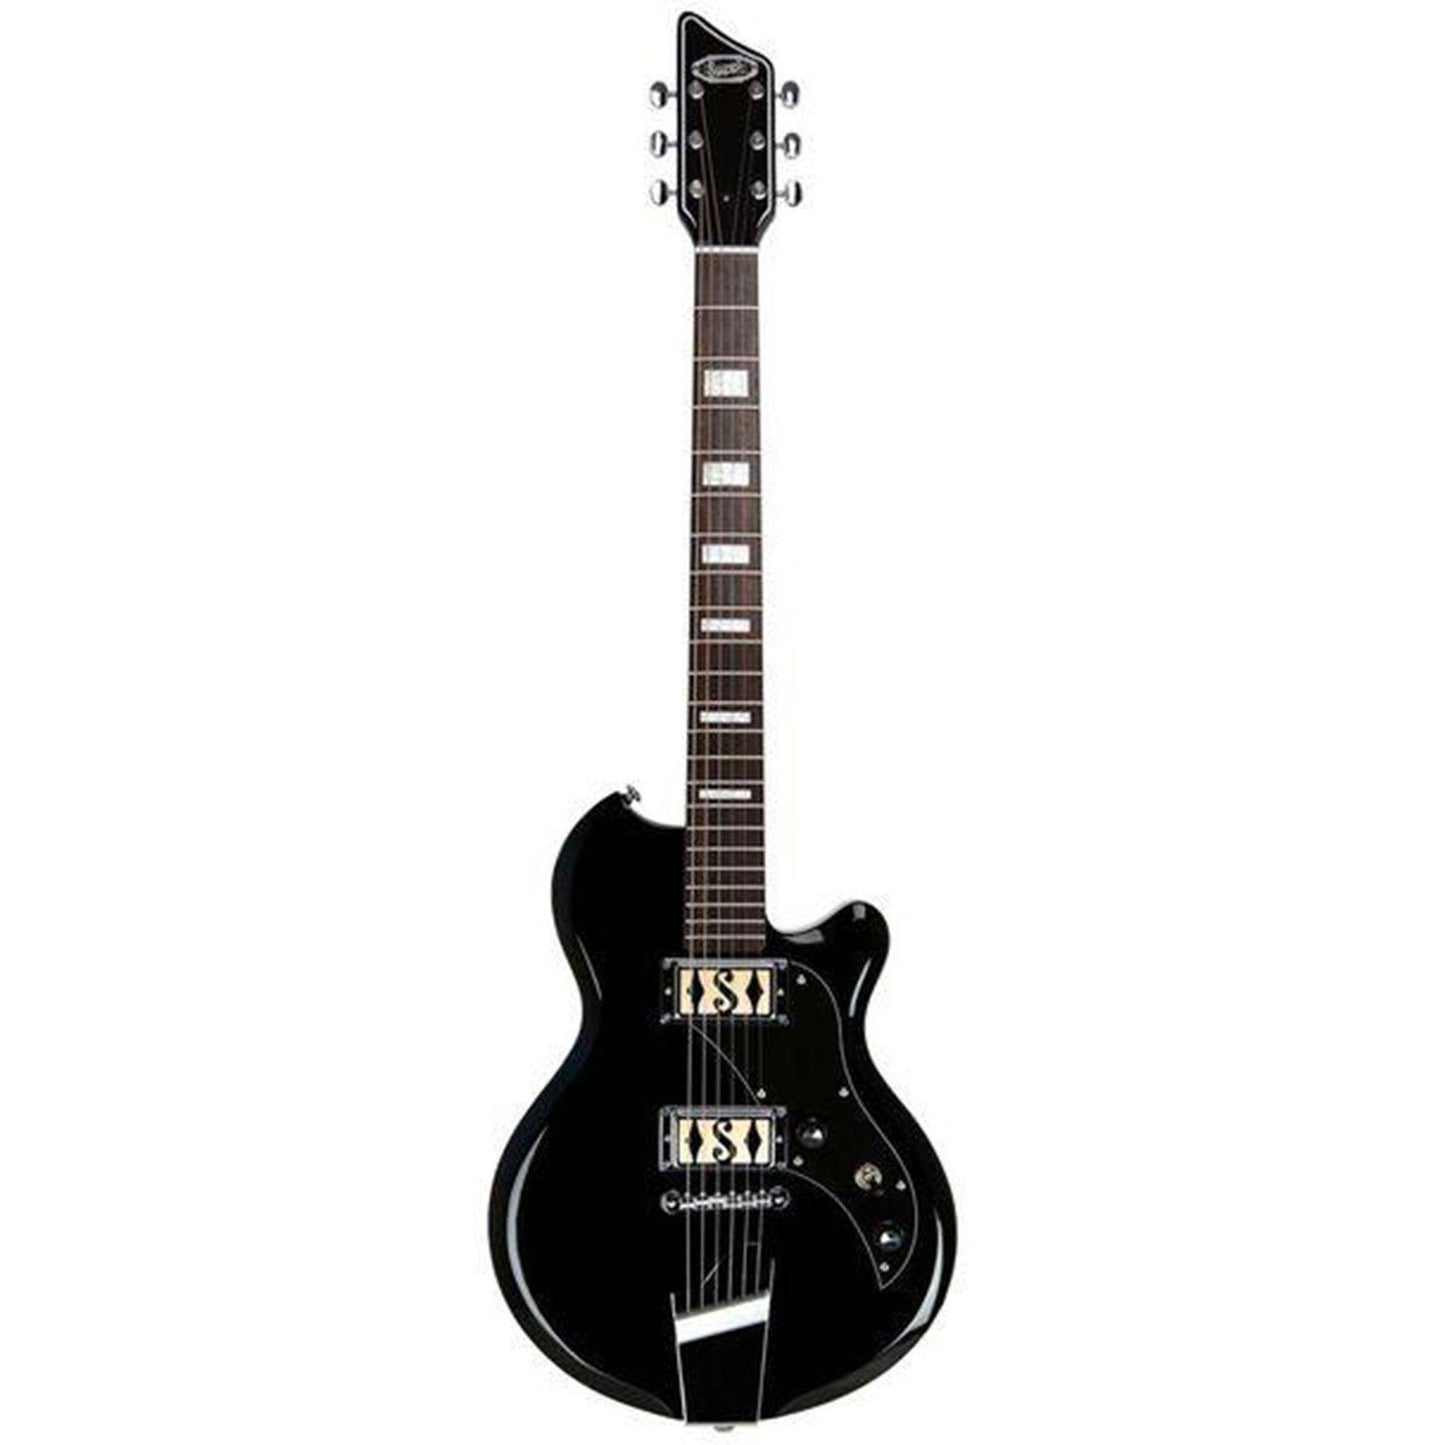 Supro Island Series Westbury Solidbody Electric Guitar in Jet Black with Gig Bag